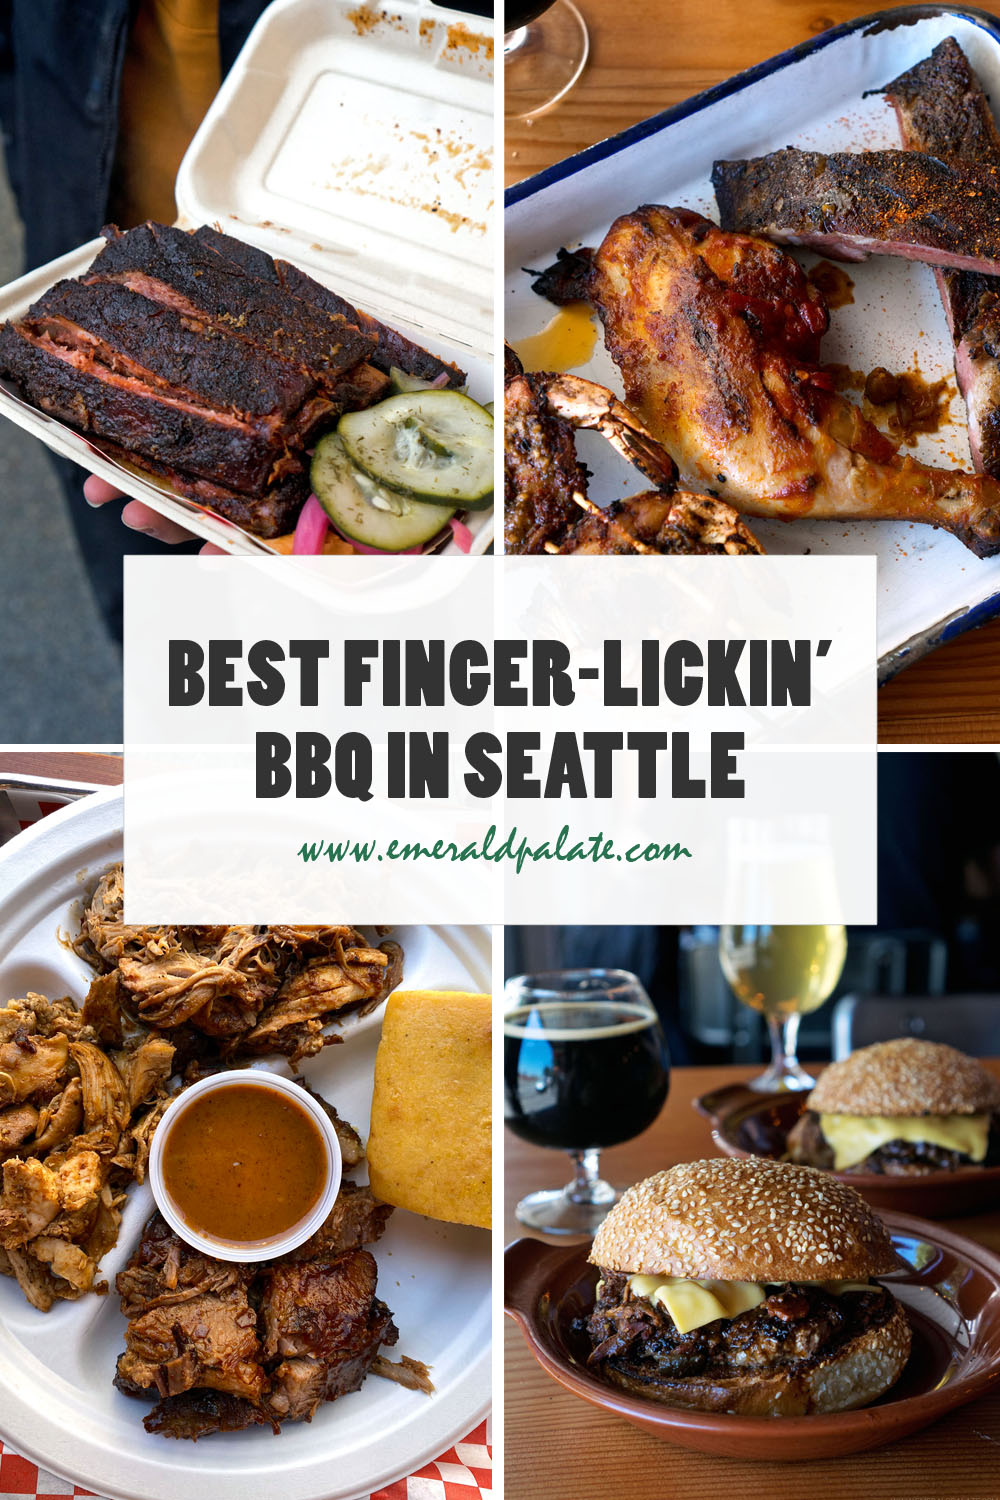 The best BBQ in Seattle. Whether you're looking for Texas BBQ, Kansas barbecue, or anything in between, these are the best Seattle restaurants for getting smoked meats and comfort food. 